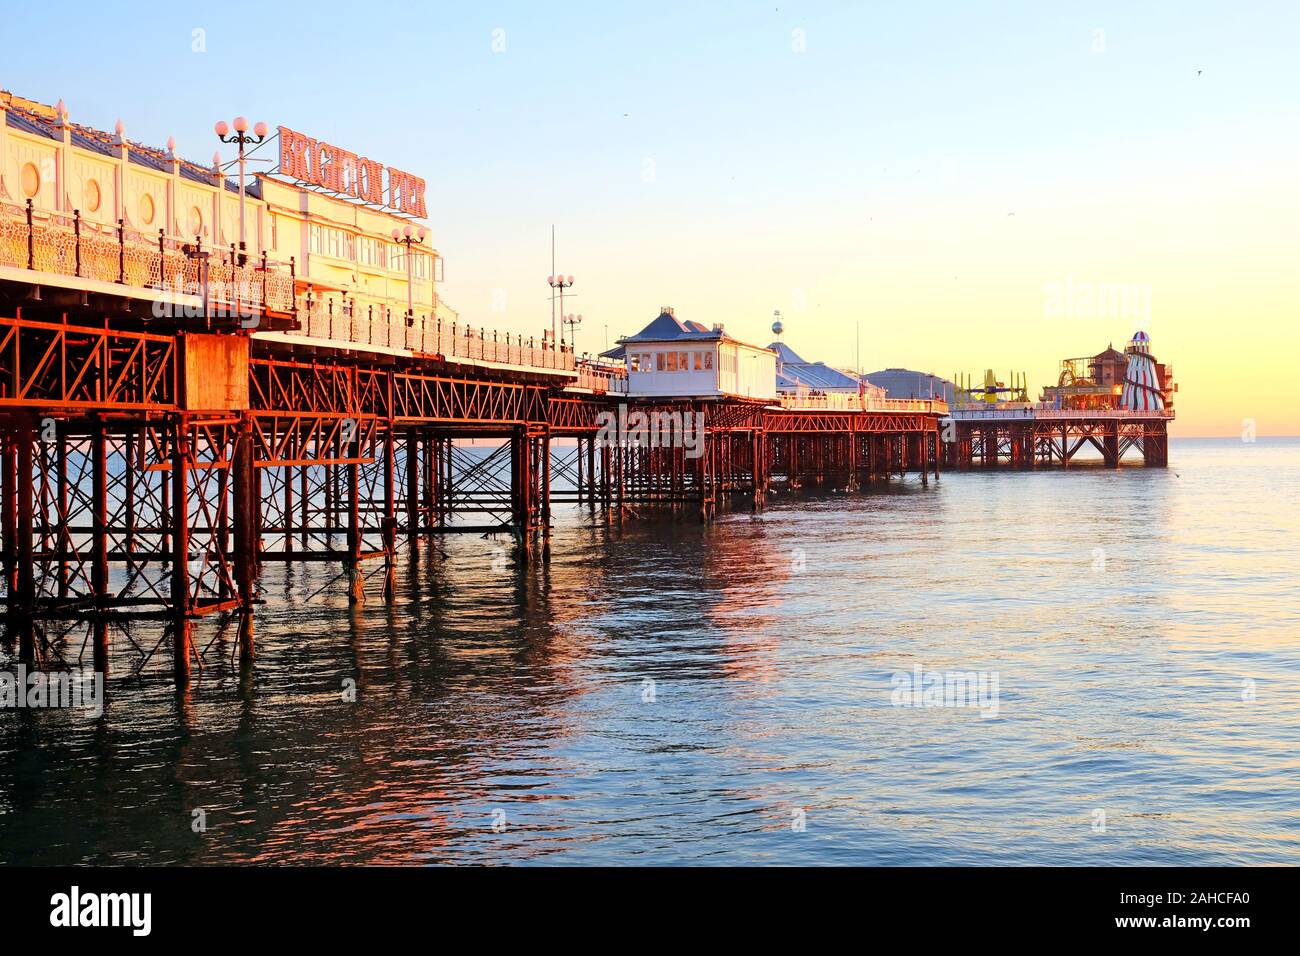 the full length of Brighton pier, the pier has an orange glow from the sun setting, the mane of the pier is on the left and the fairground is at the e Stock Photo